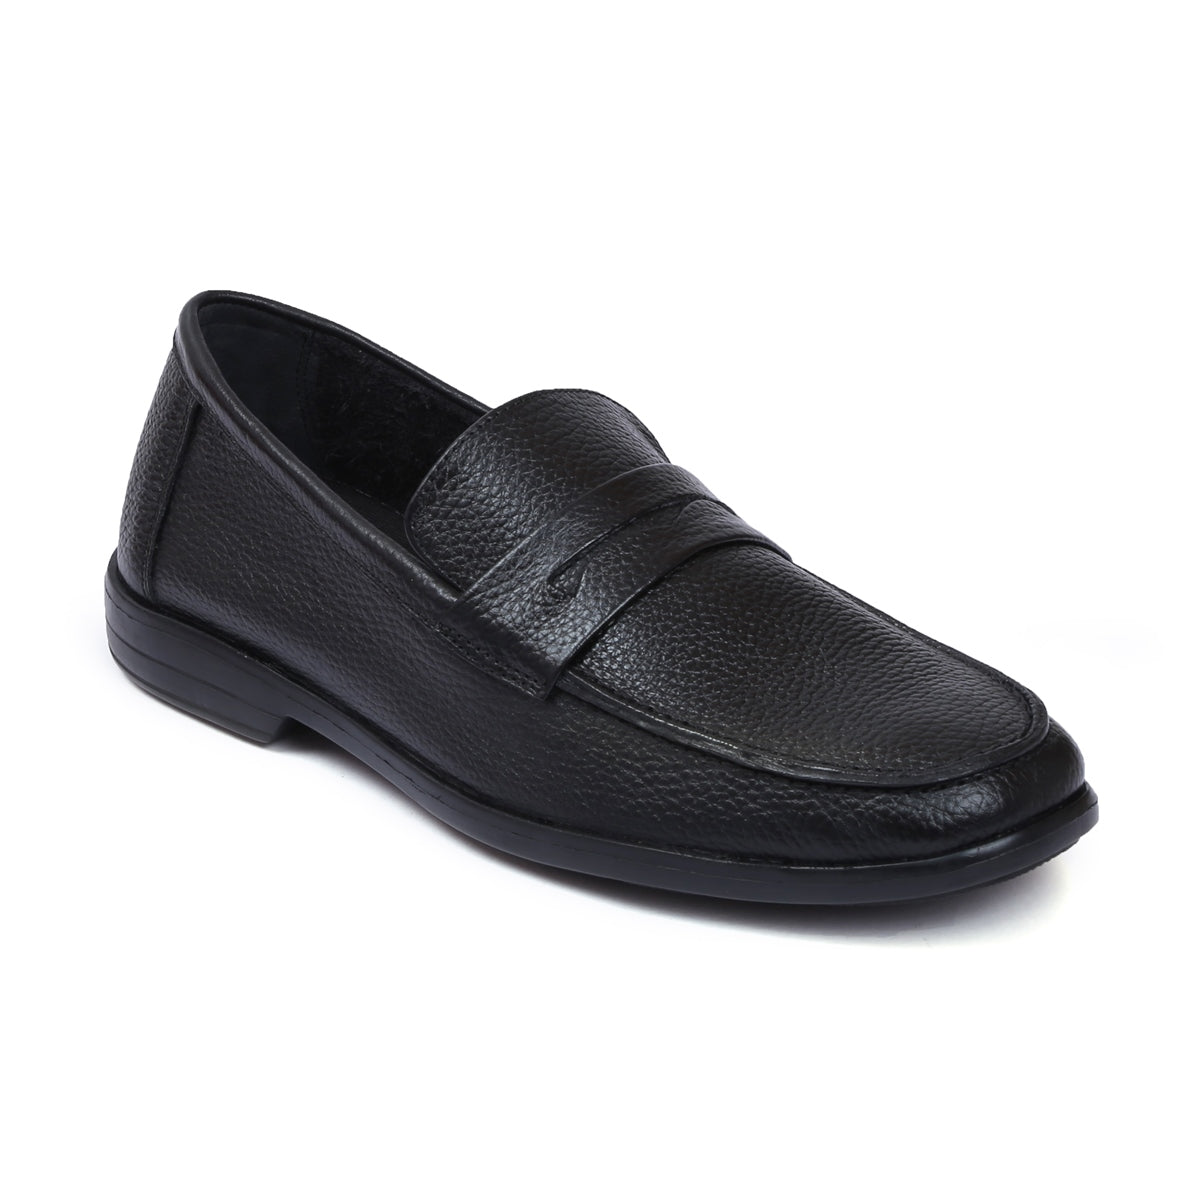 Leather Loafers for Men SL-12